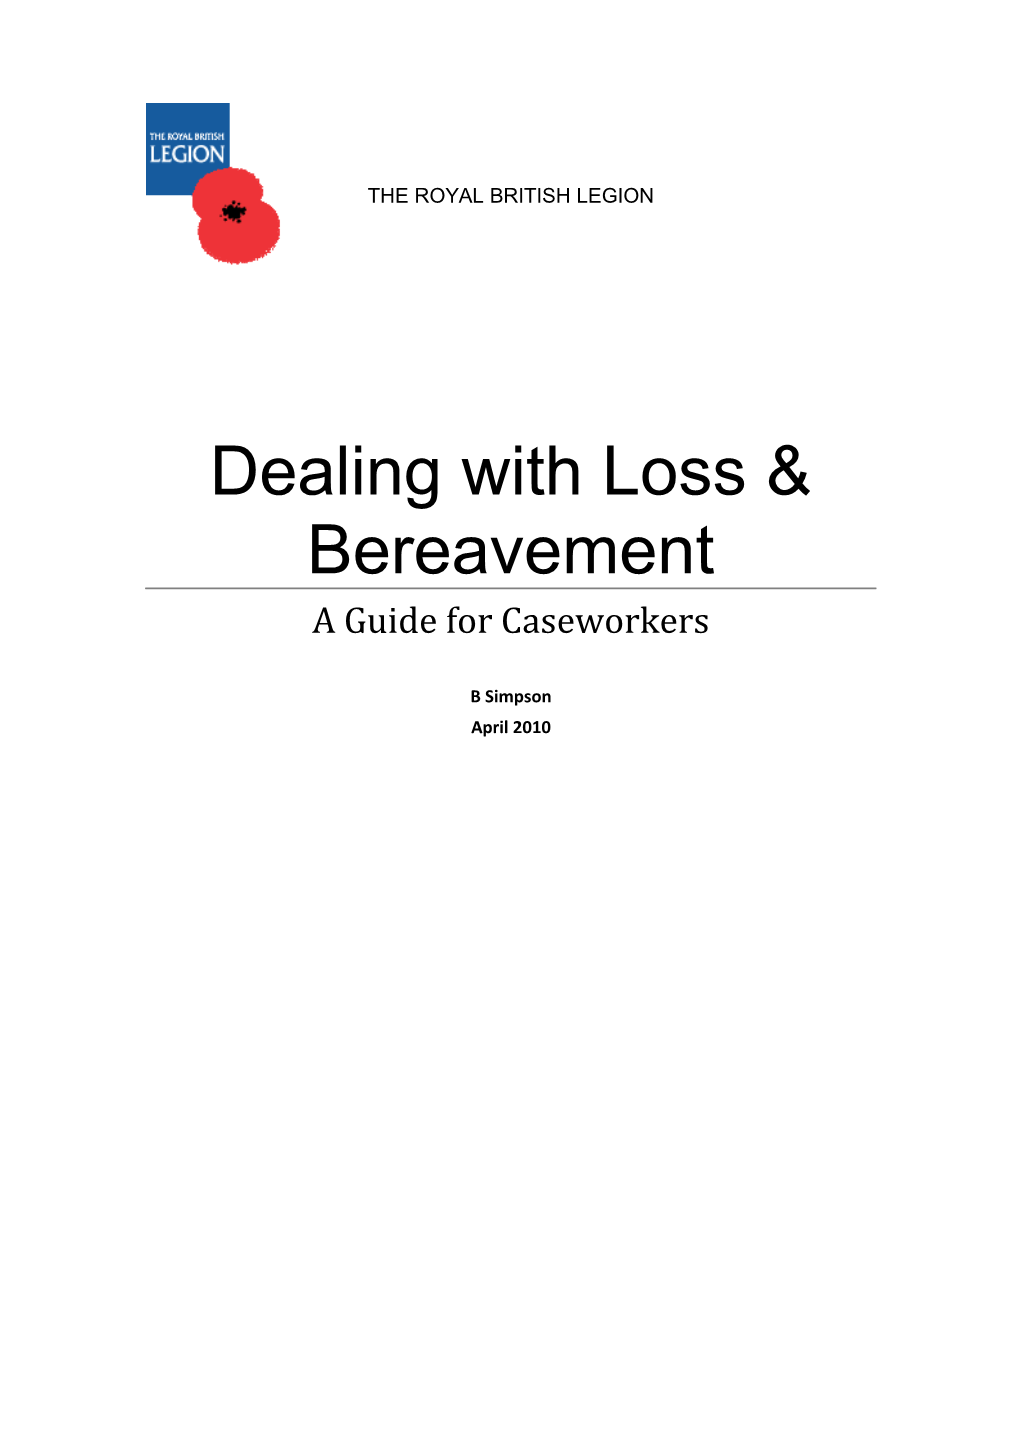 Dealing with Loss & Bereavement